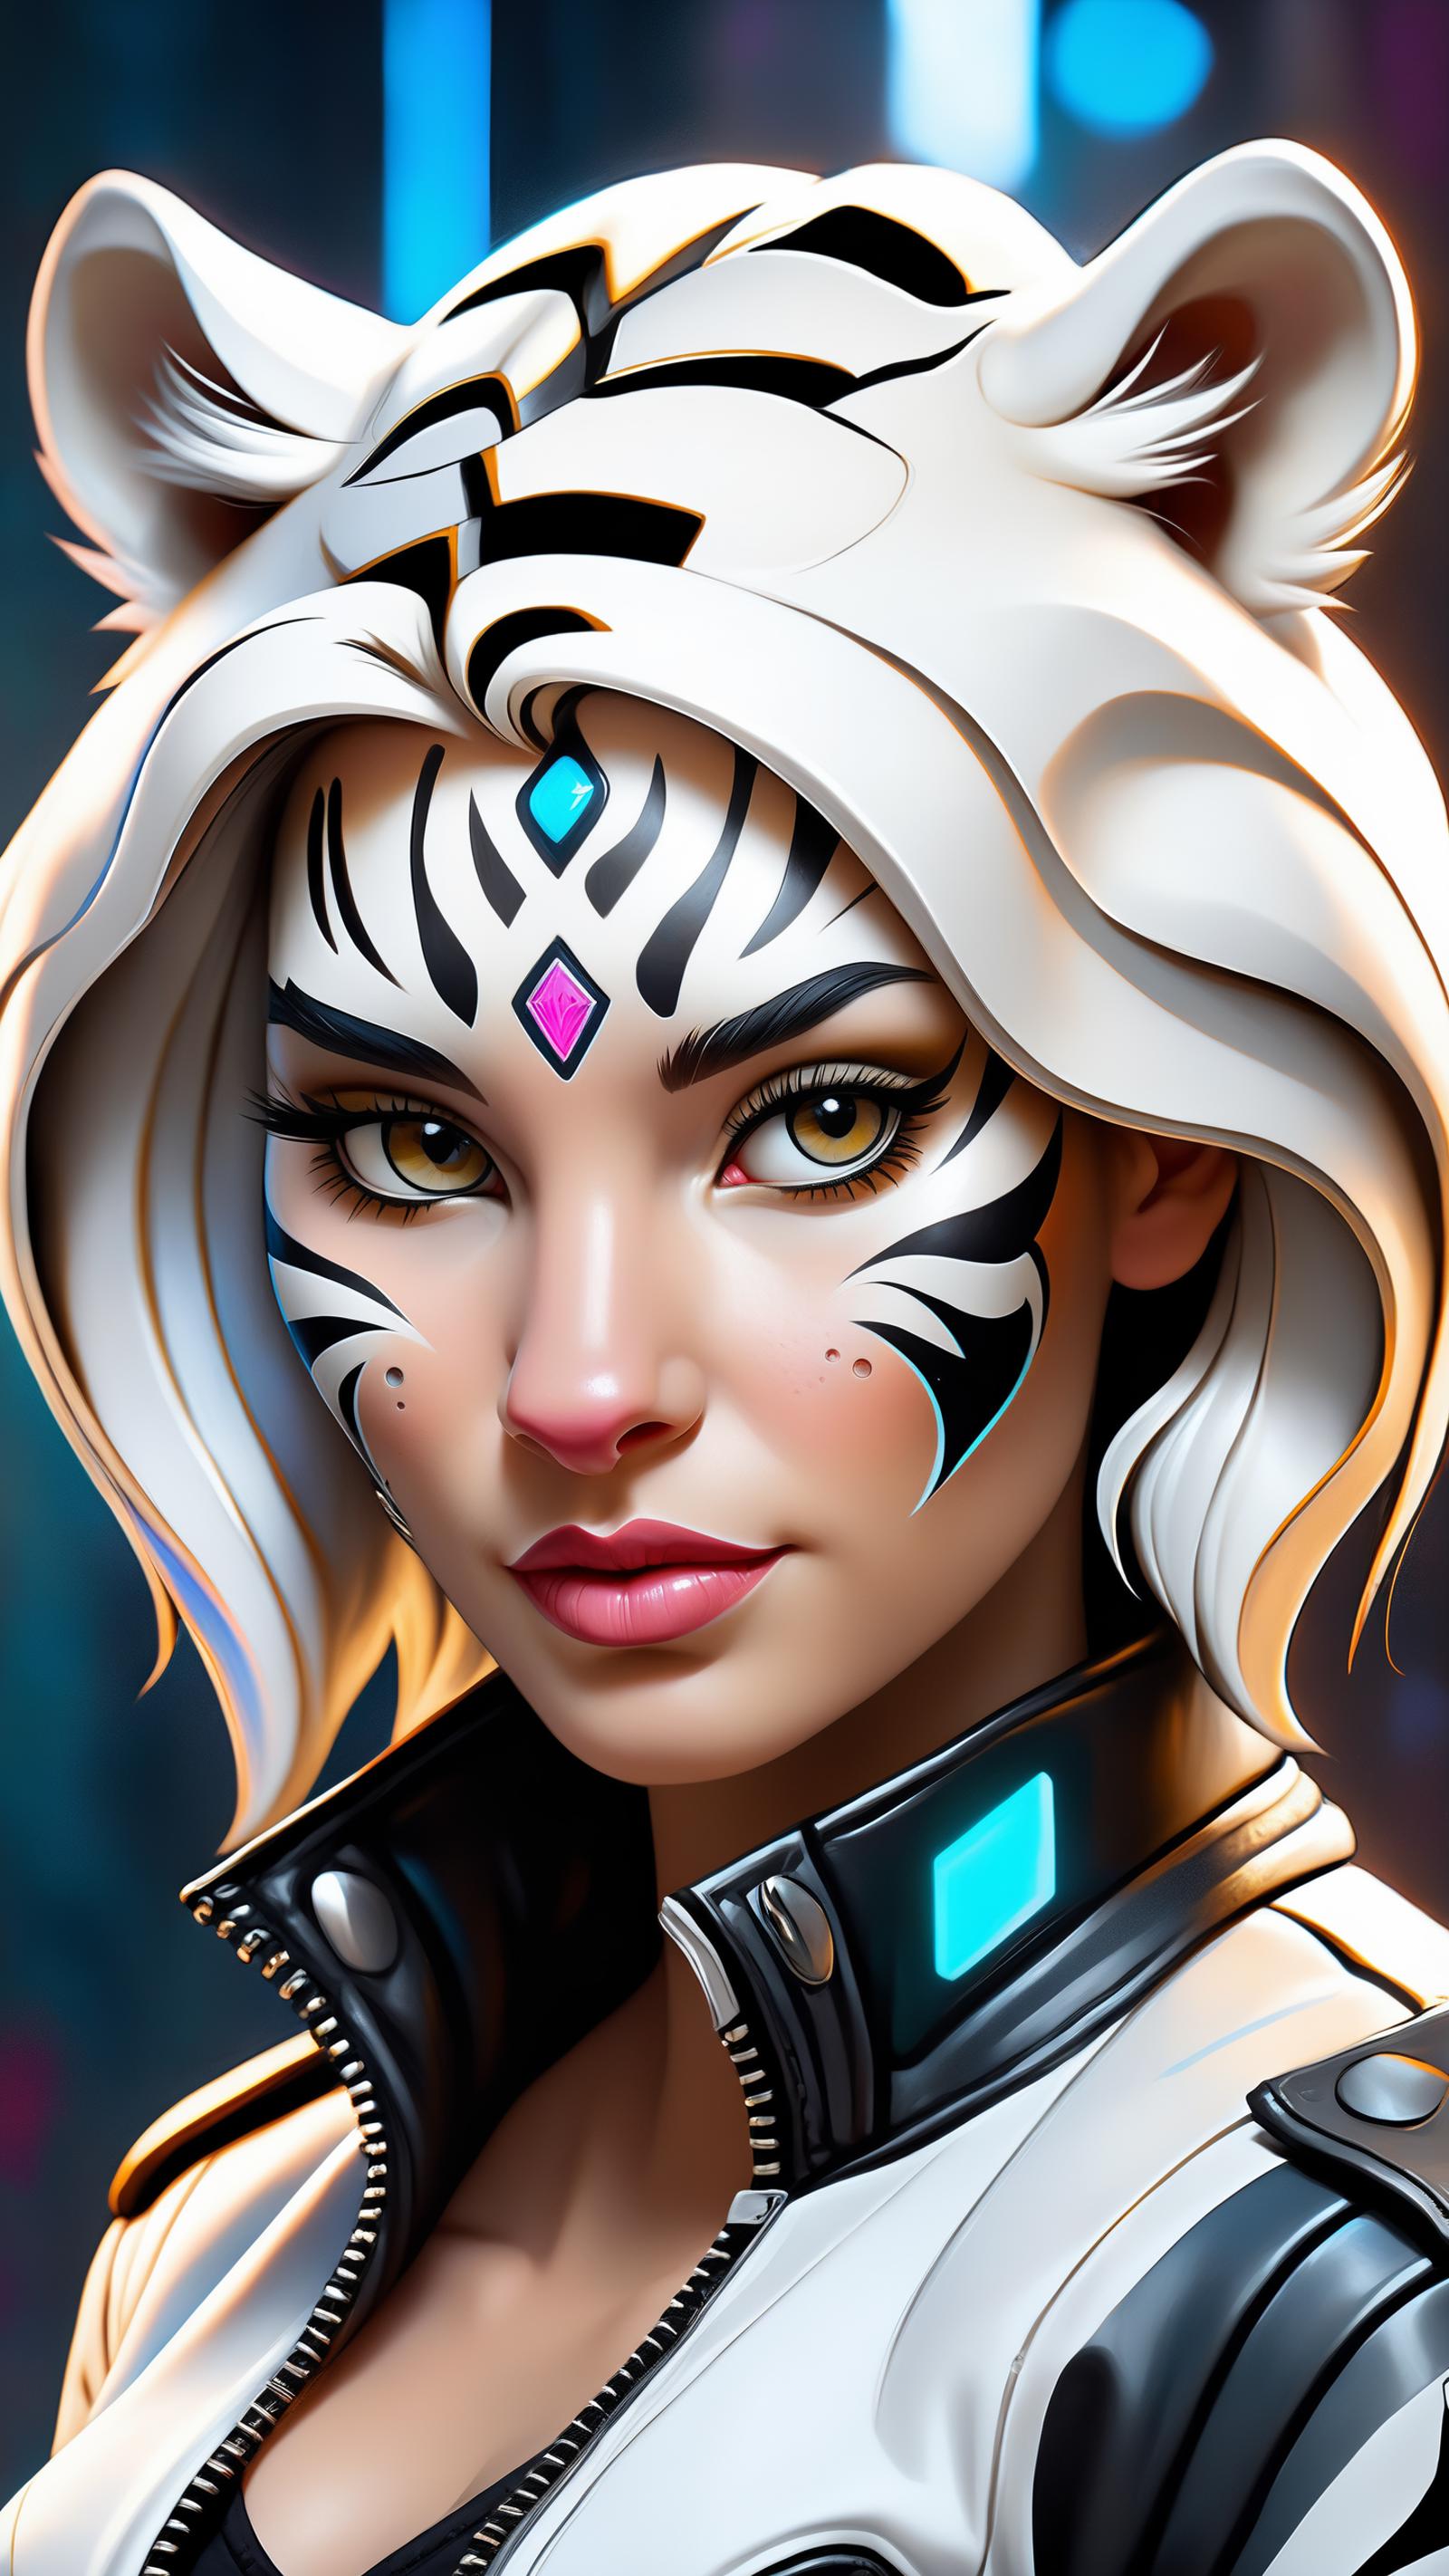 A 3D animated woman with white hair, tiger face paint, and blue accessories.